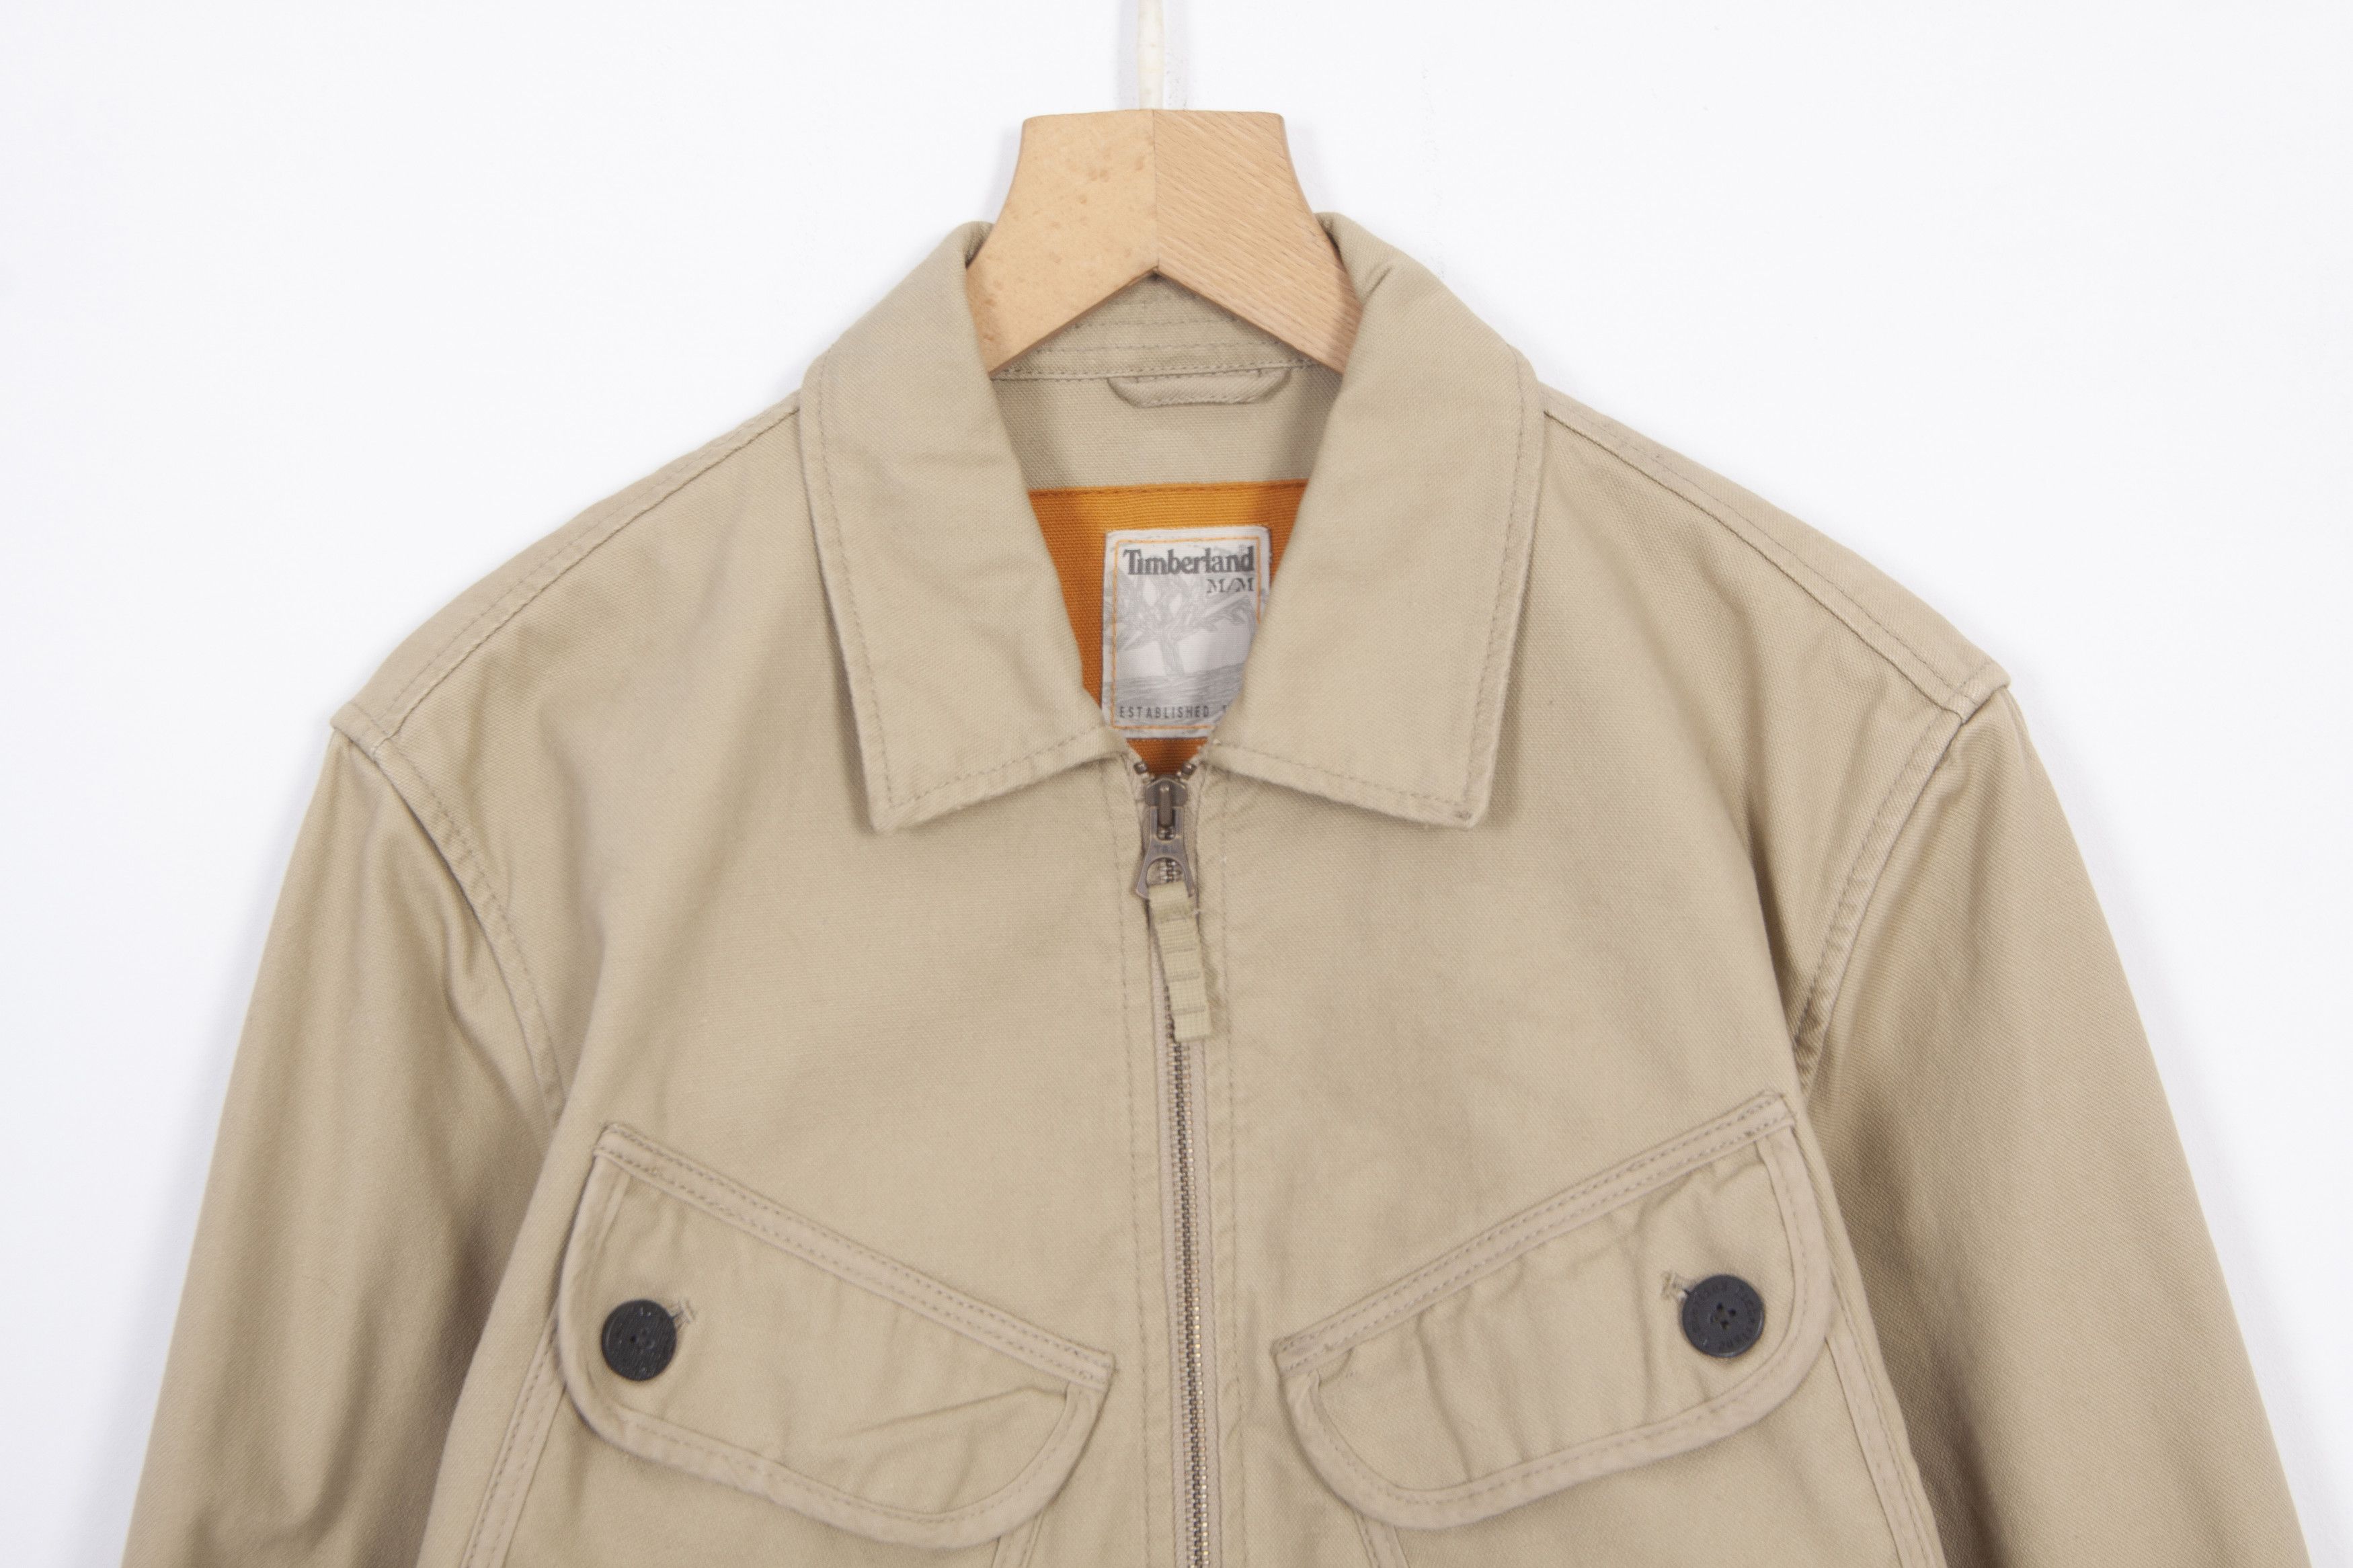 Timberland Timberland Cotton Beige Military Jacket Bomber Style Size US M / EU 48-50 / 2 - 2 Preview